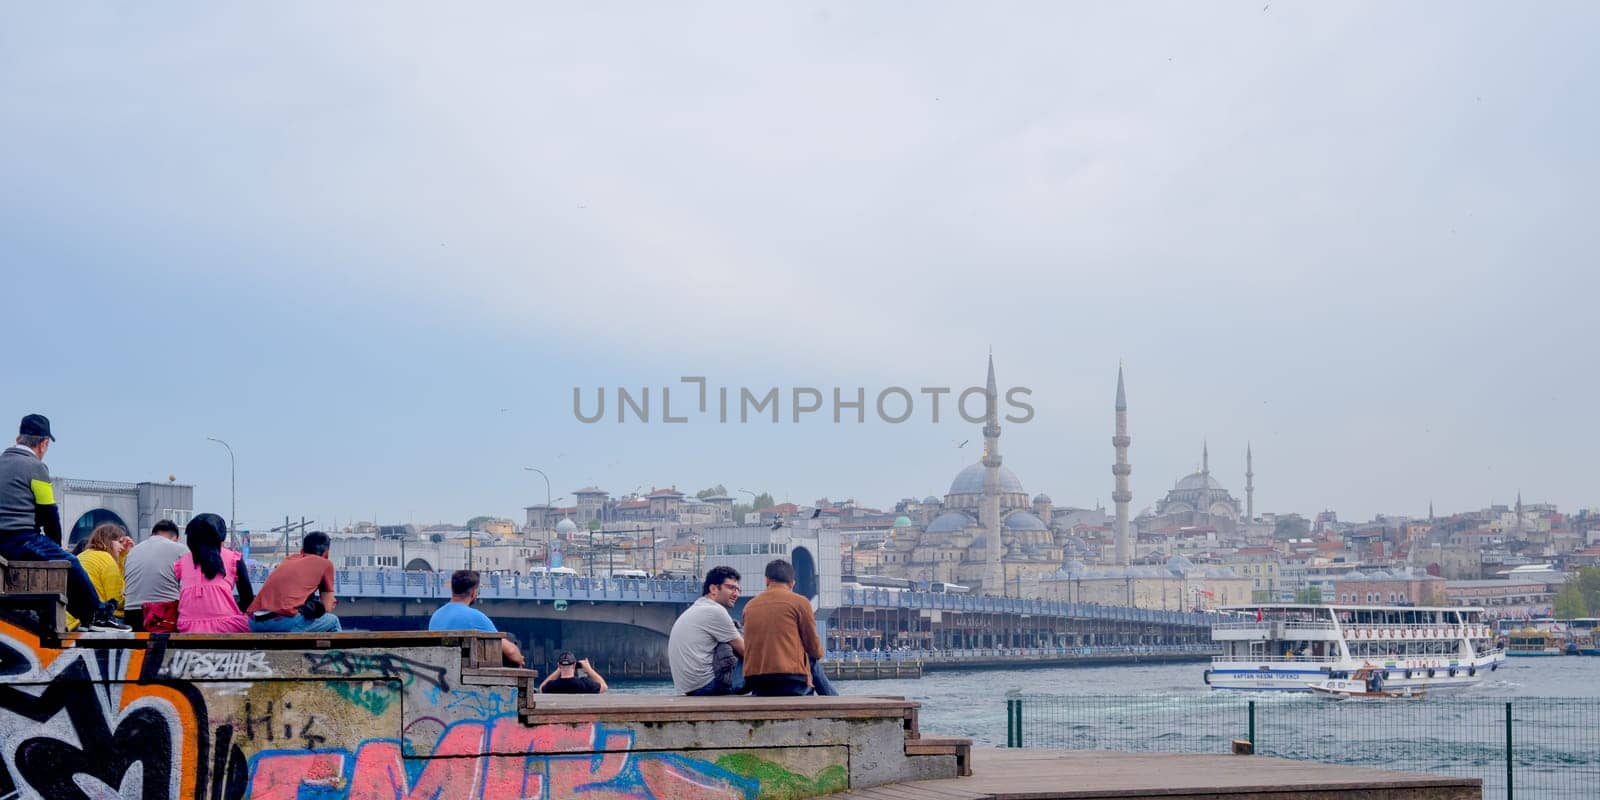 Istanbul, Turkey, May 02, 2023: The Golden Horn Embankment in the historical center of Istanbul with a view of the Suleymaniye Mosque and the Galata Bridge.